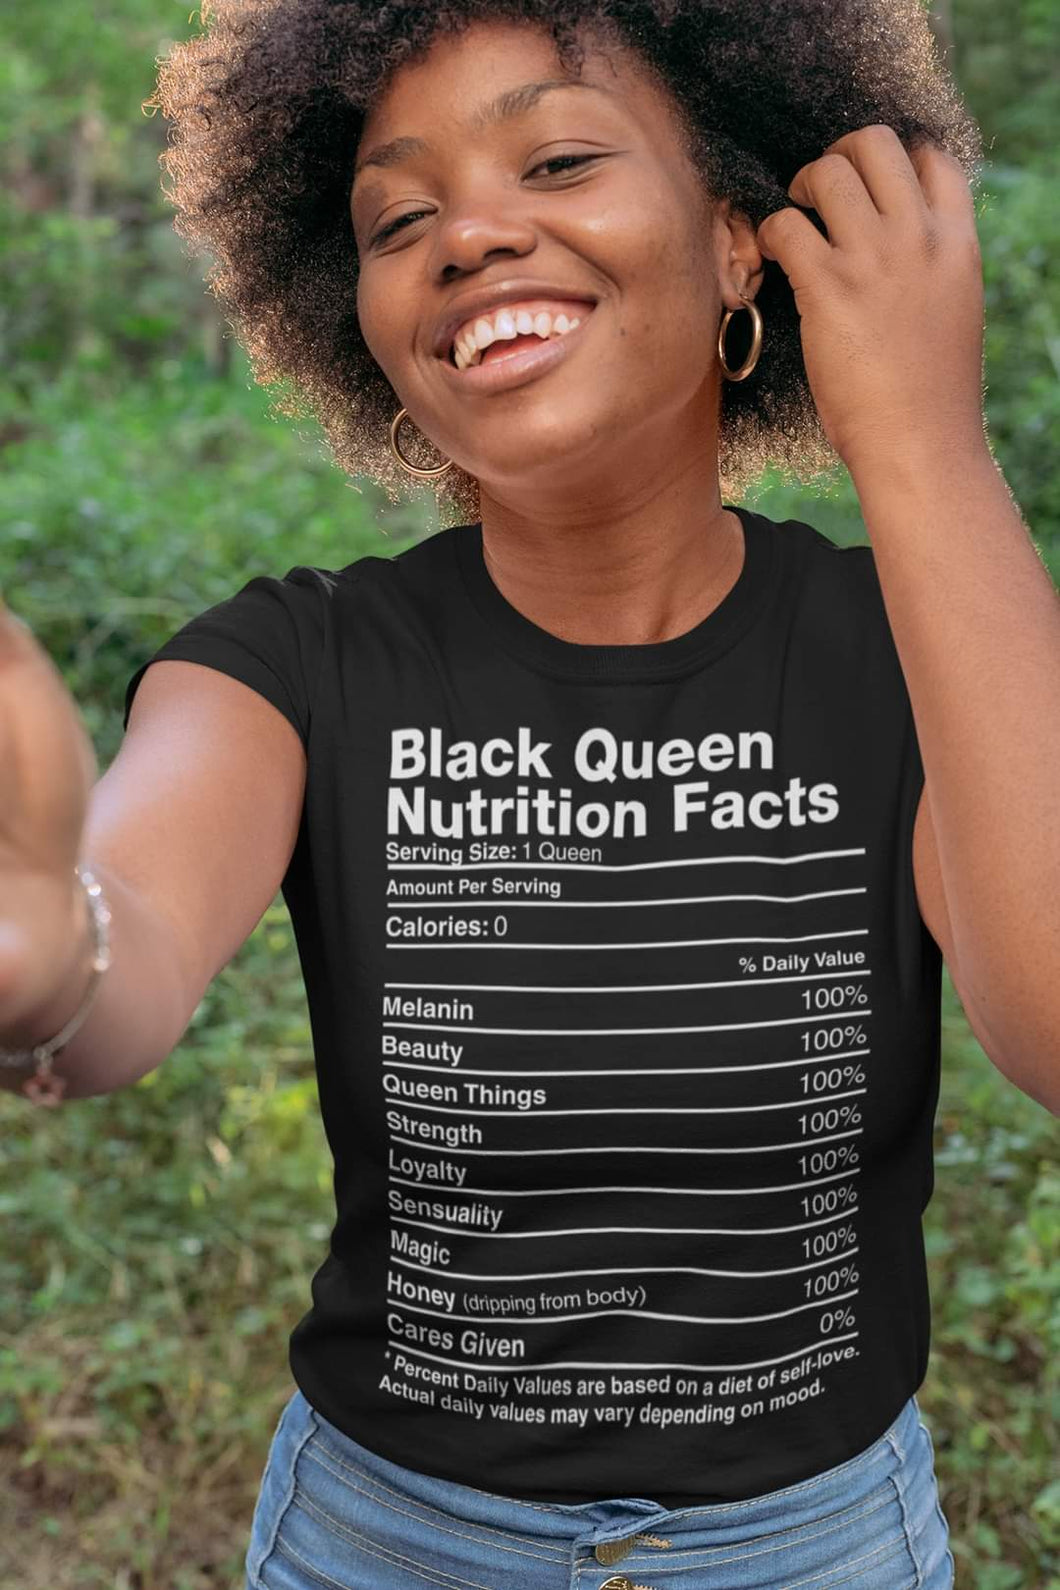 Black Queen Nutritional Facts